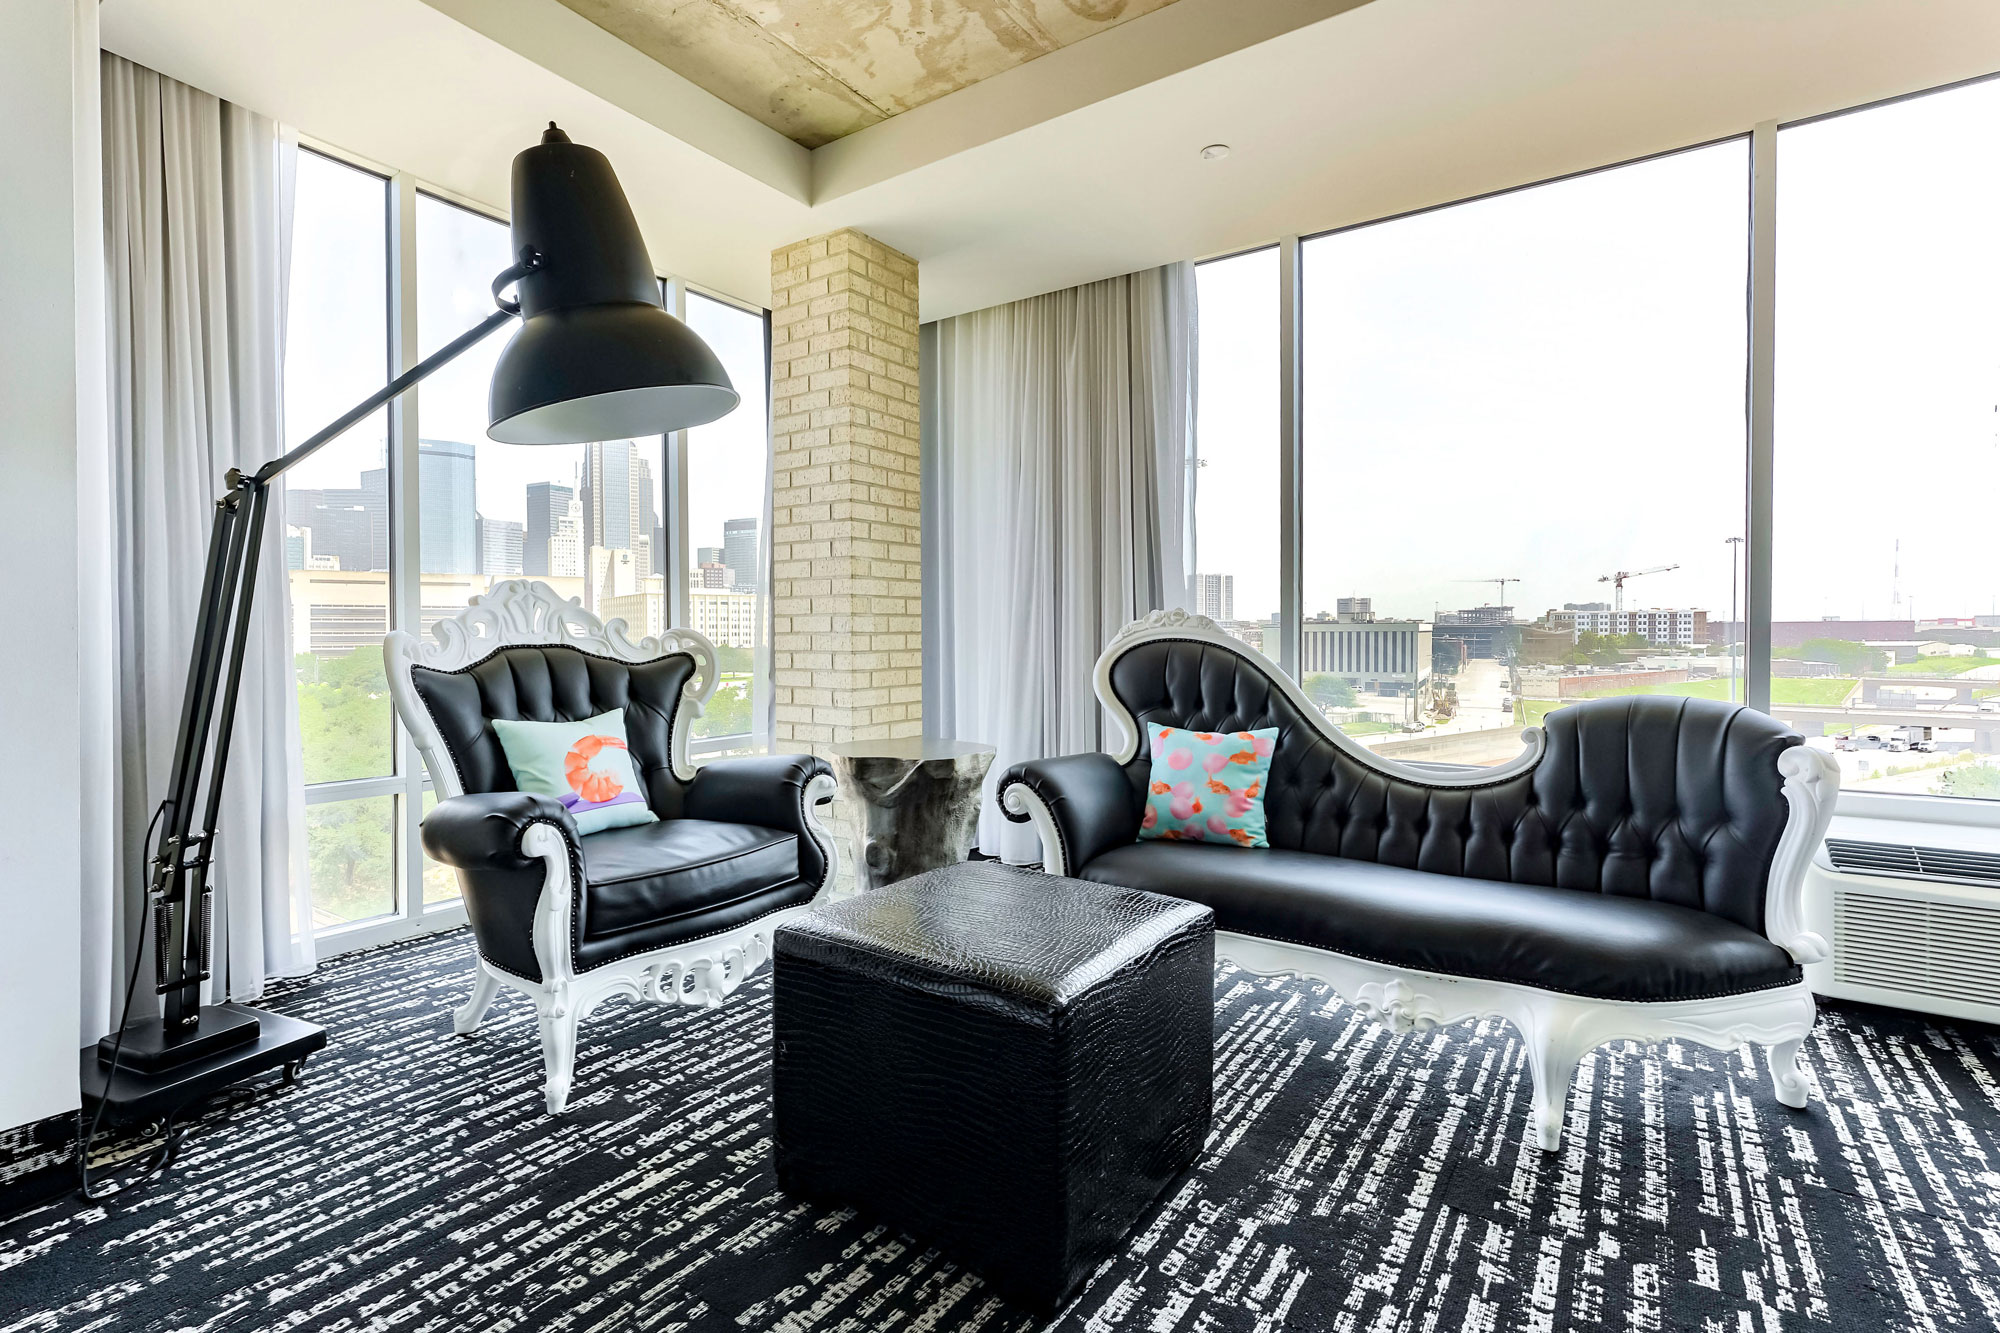 Artistic black and white seating and floor-to-ceiling windows at our Dallas hotel